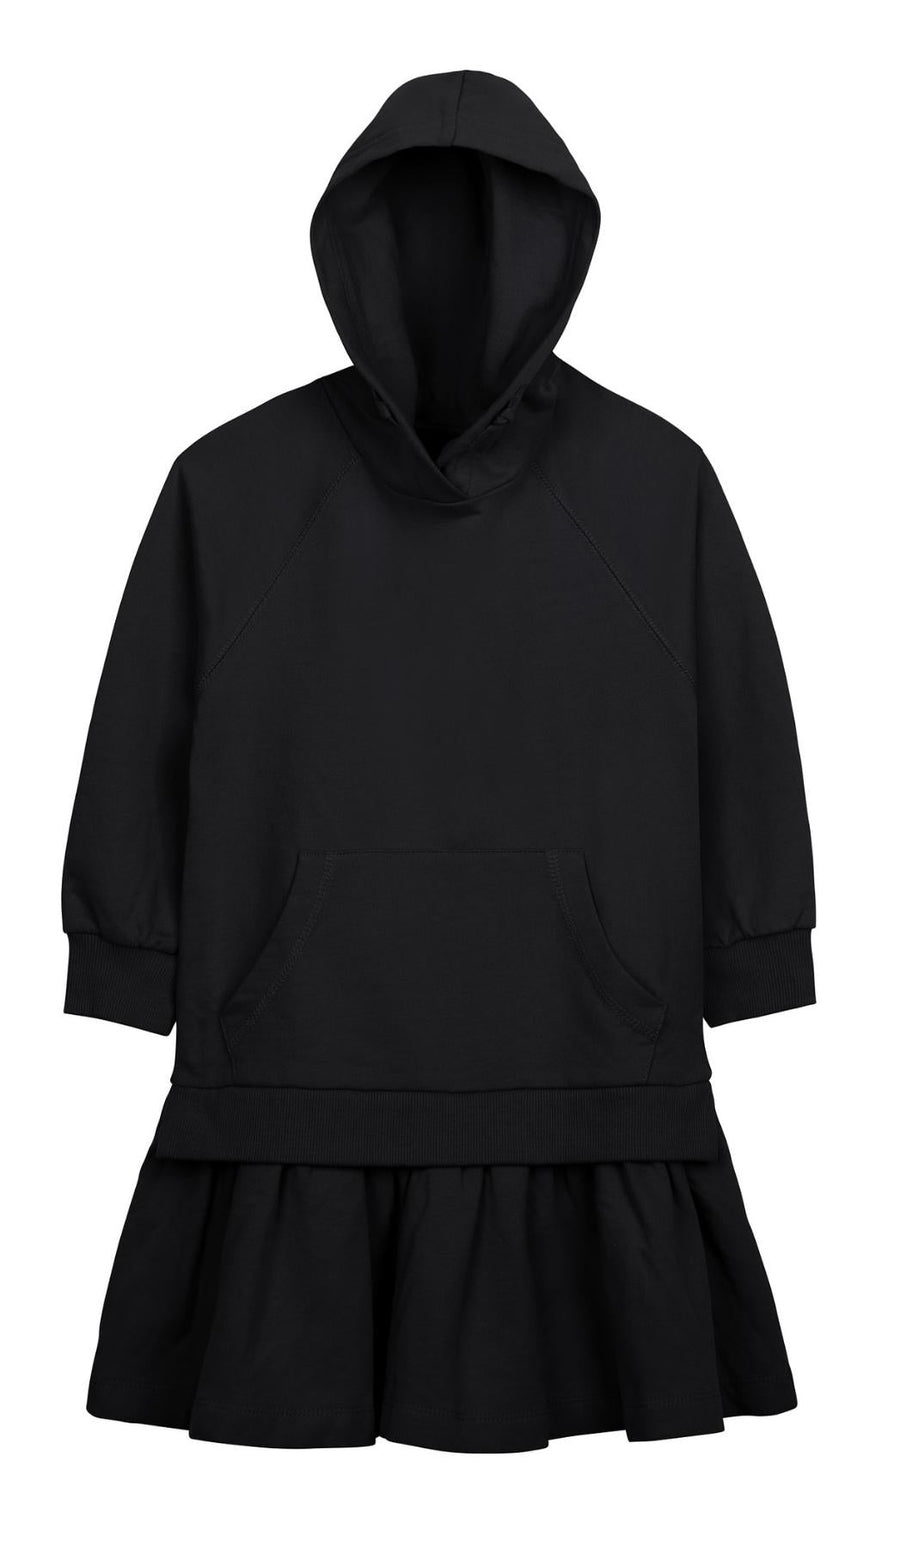 HOODIE FOOTER DRESS WITH DEMI SKIRT - Black